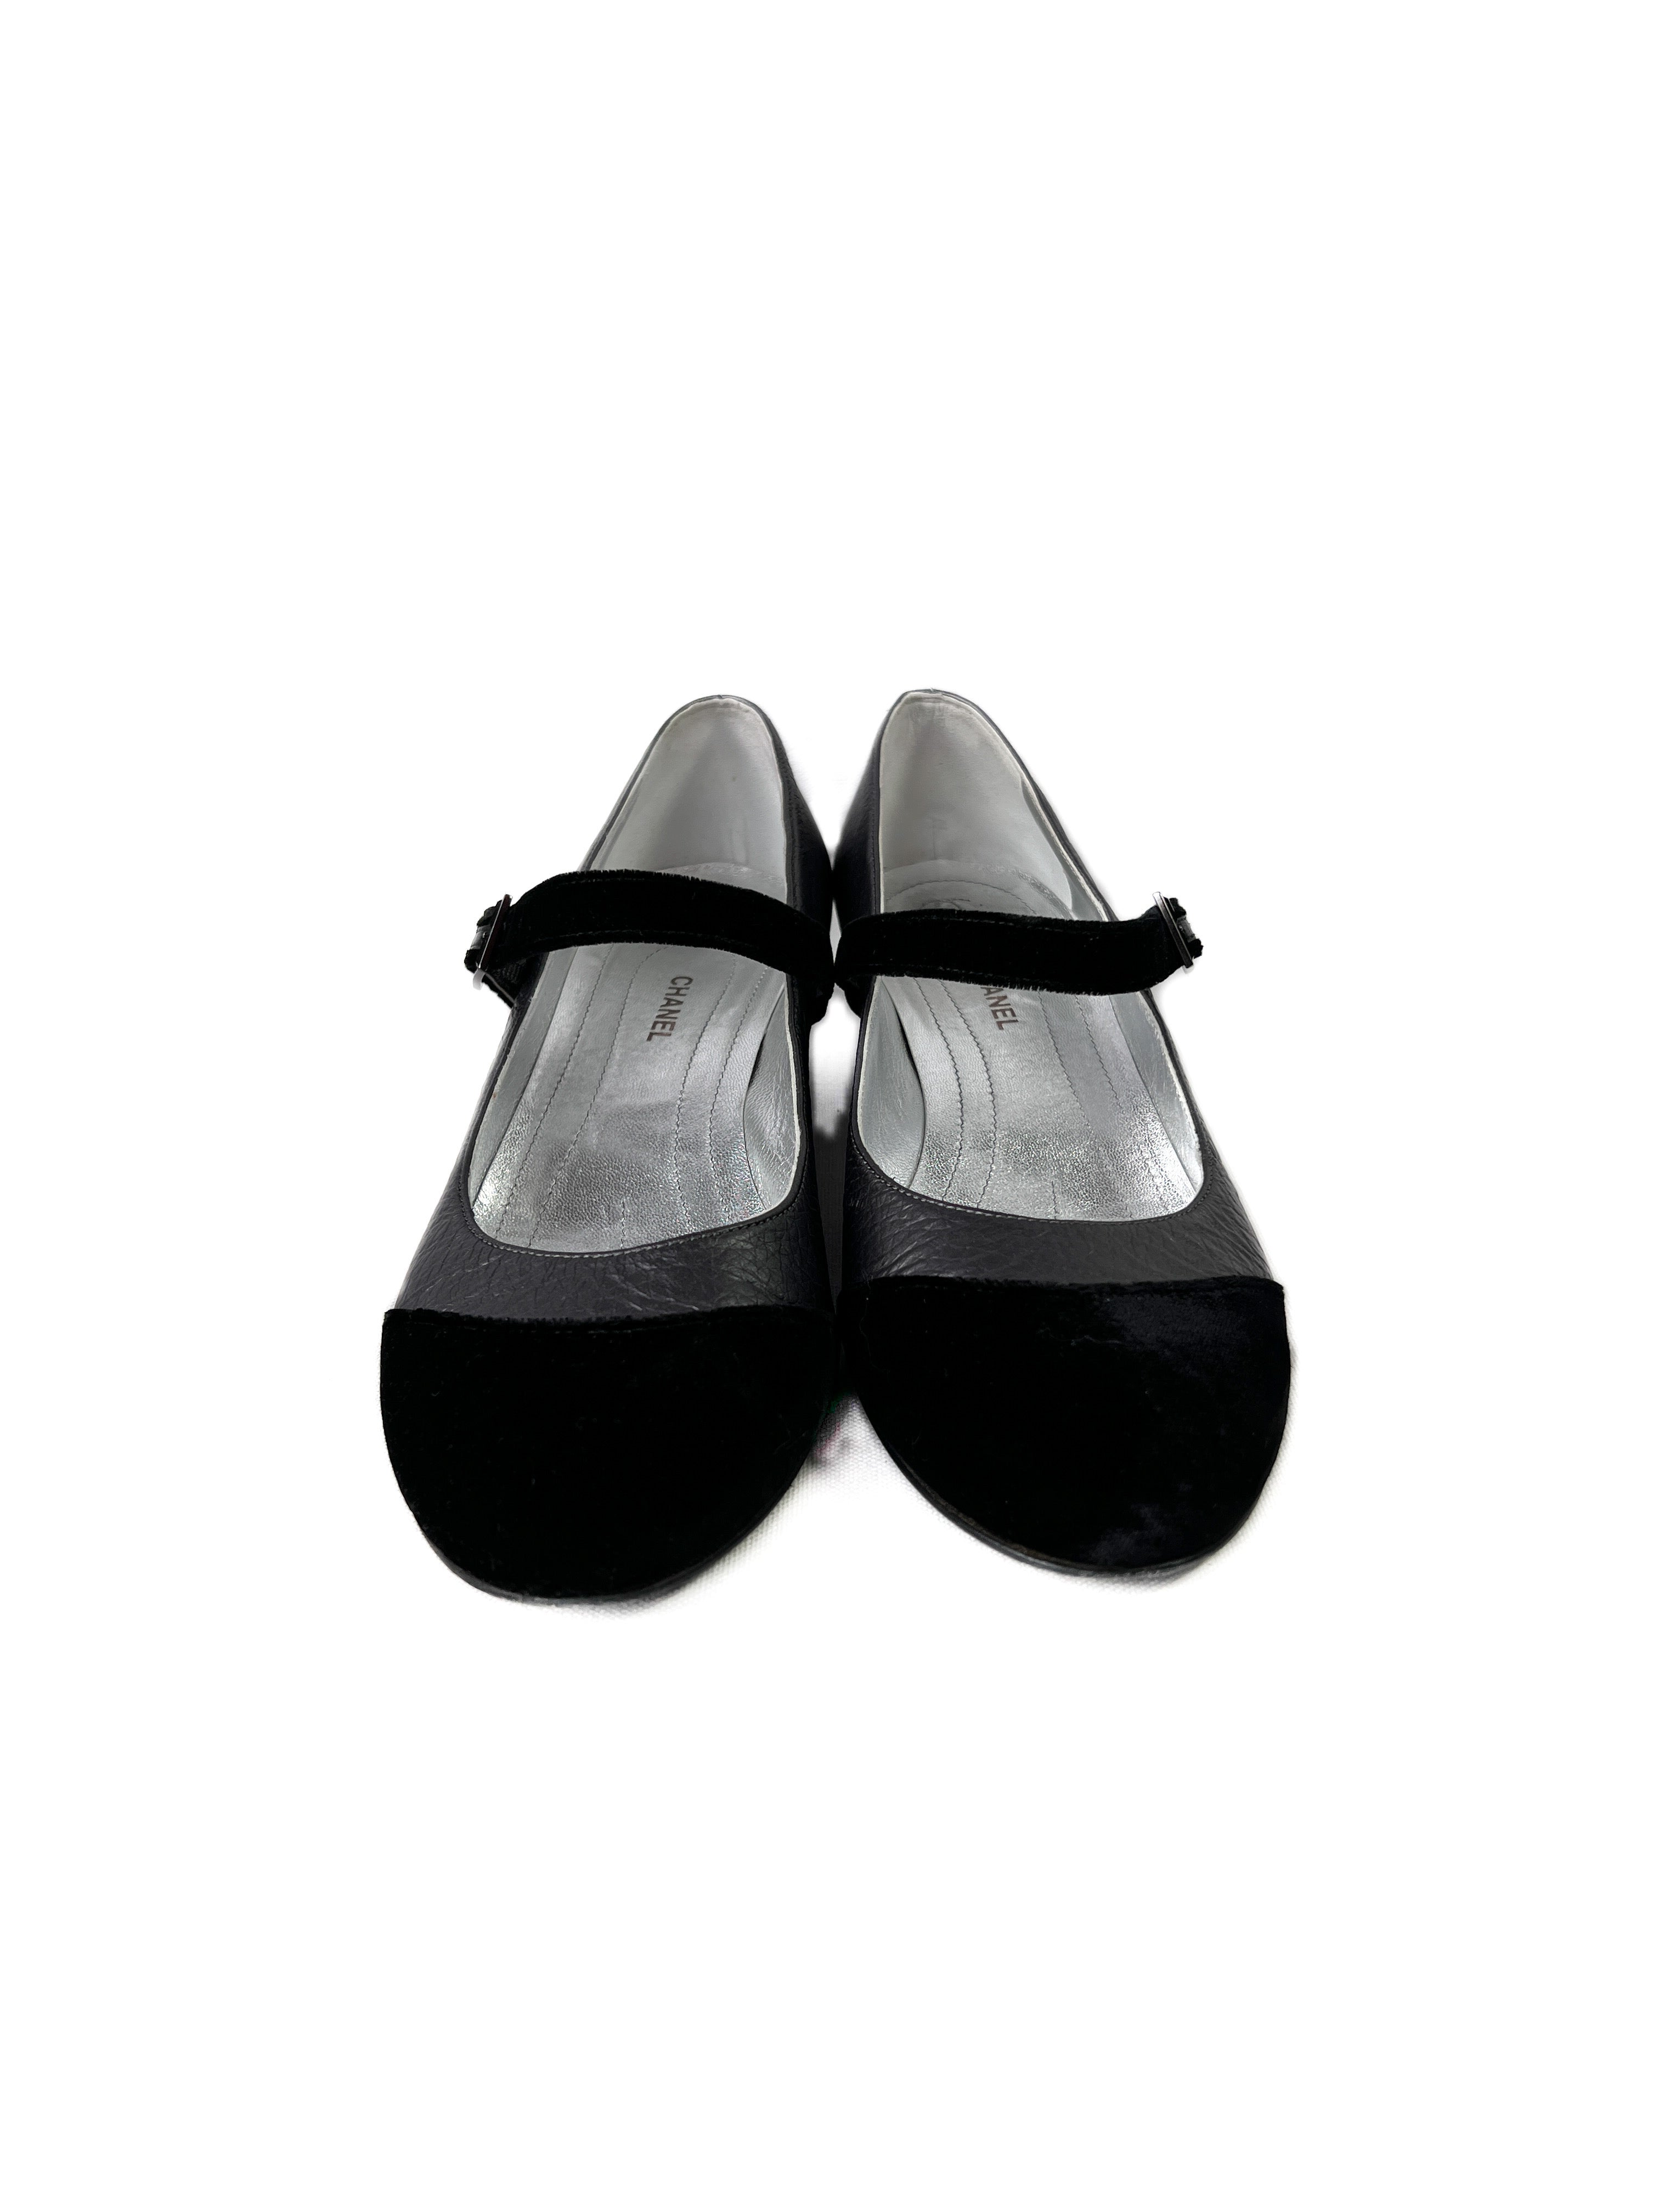 Chanel silver and black leather Mary Janes size 38.5 – My